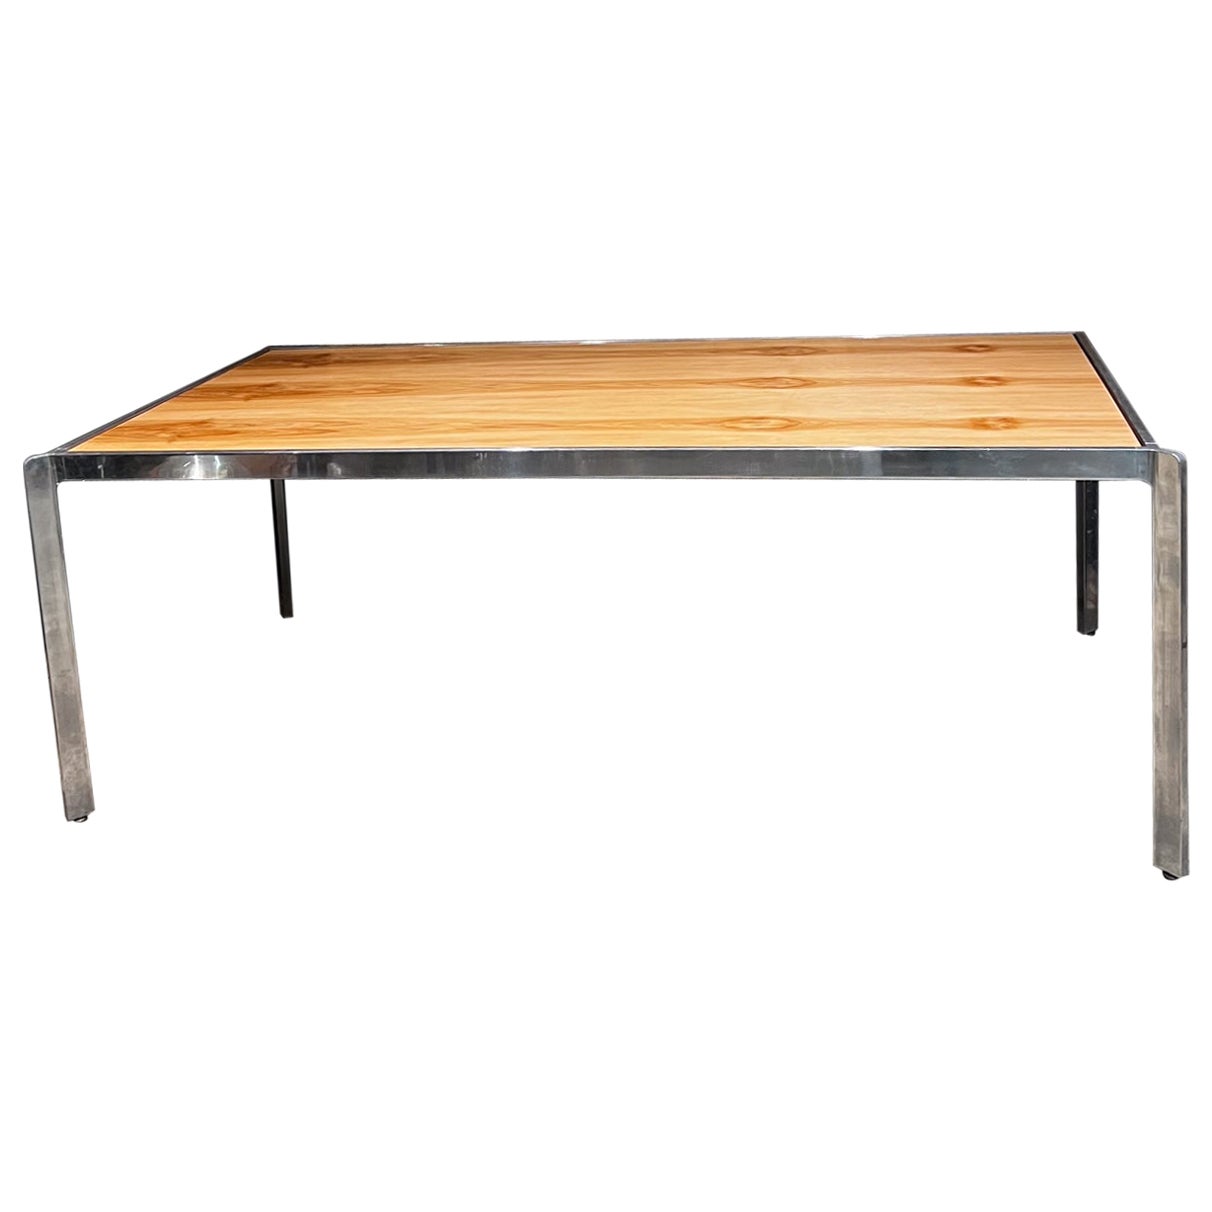 1970s Milo Baughman Dining Table Polished Aluminum and Wood